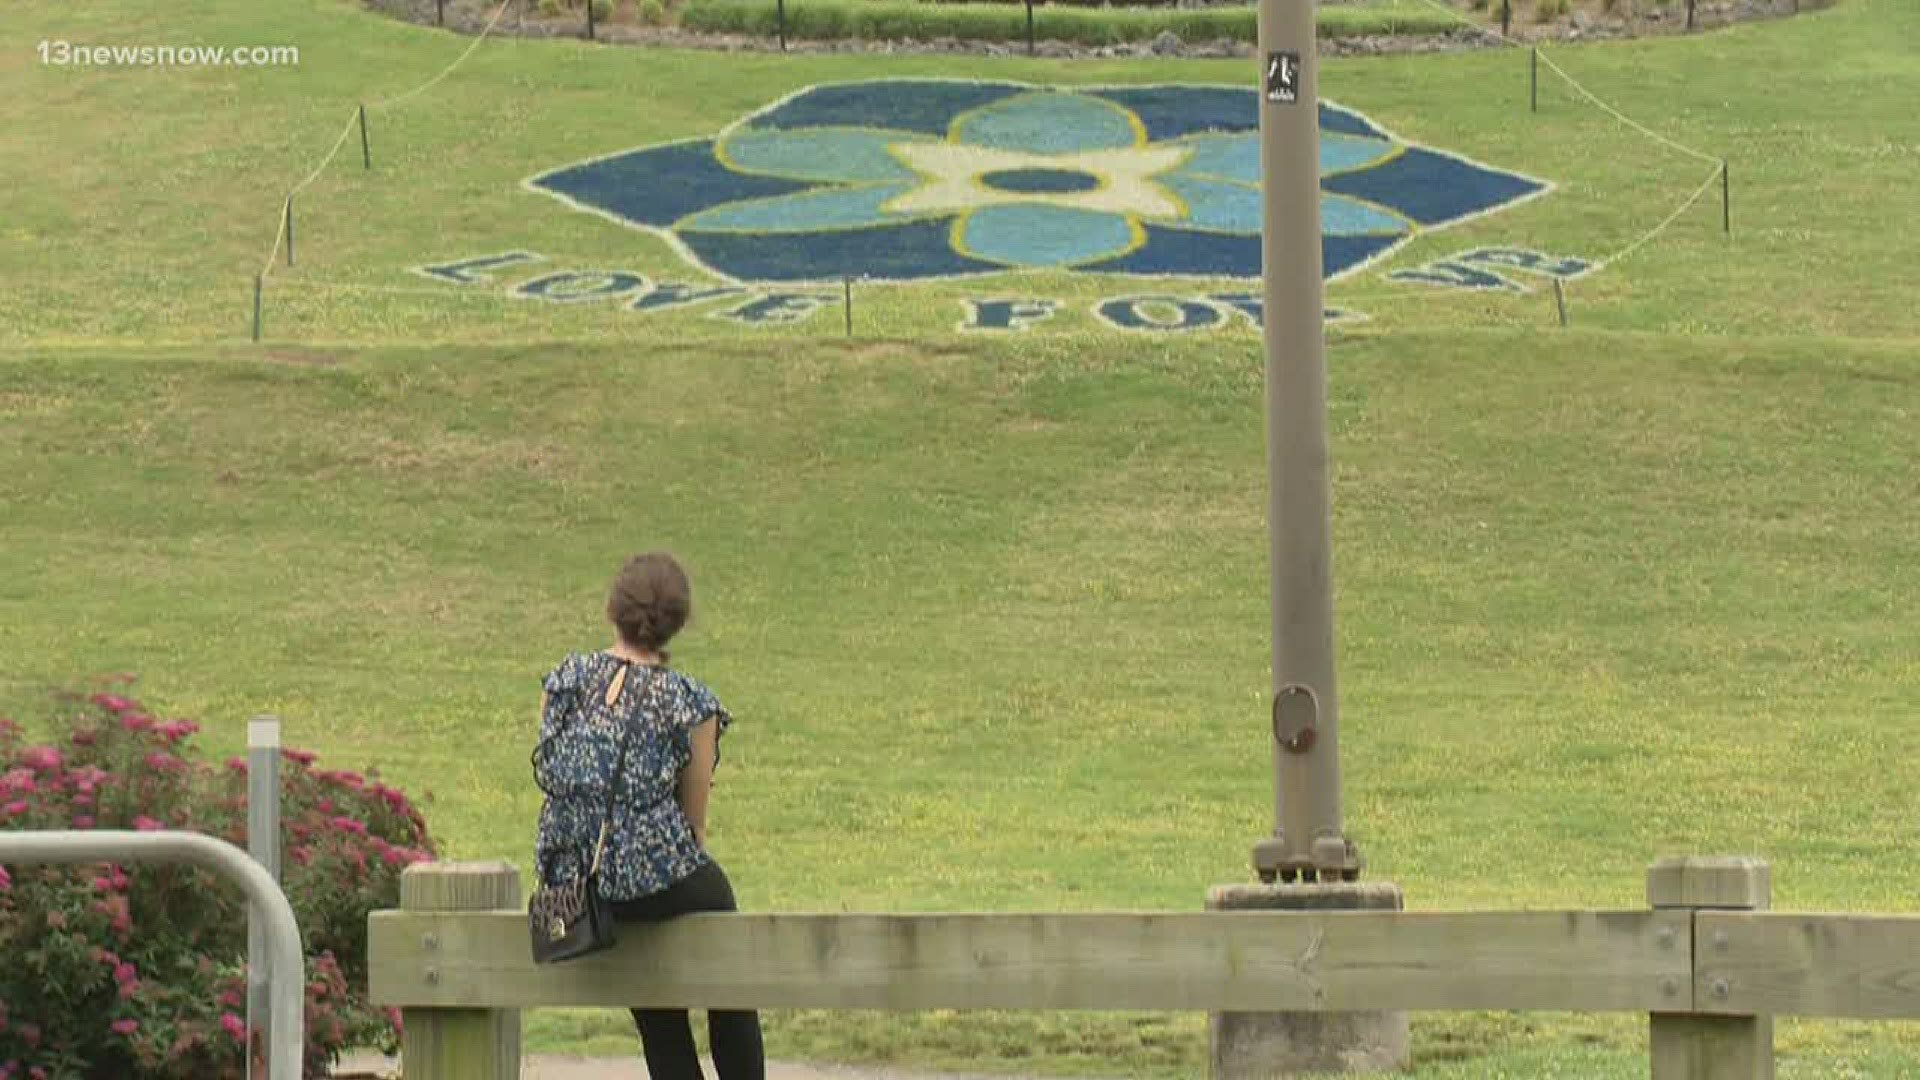 While exercising, many people stopped and took pictures of the Forget-me-not memorial at Mt. Trashmore Park. They said they want to honor and remember the victims.